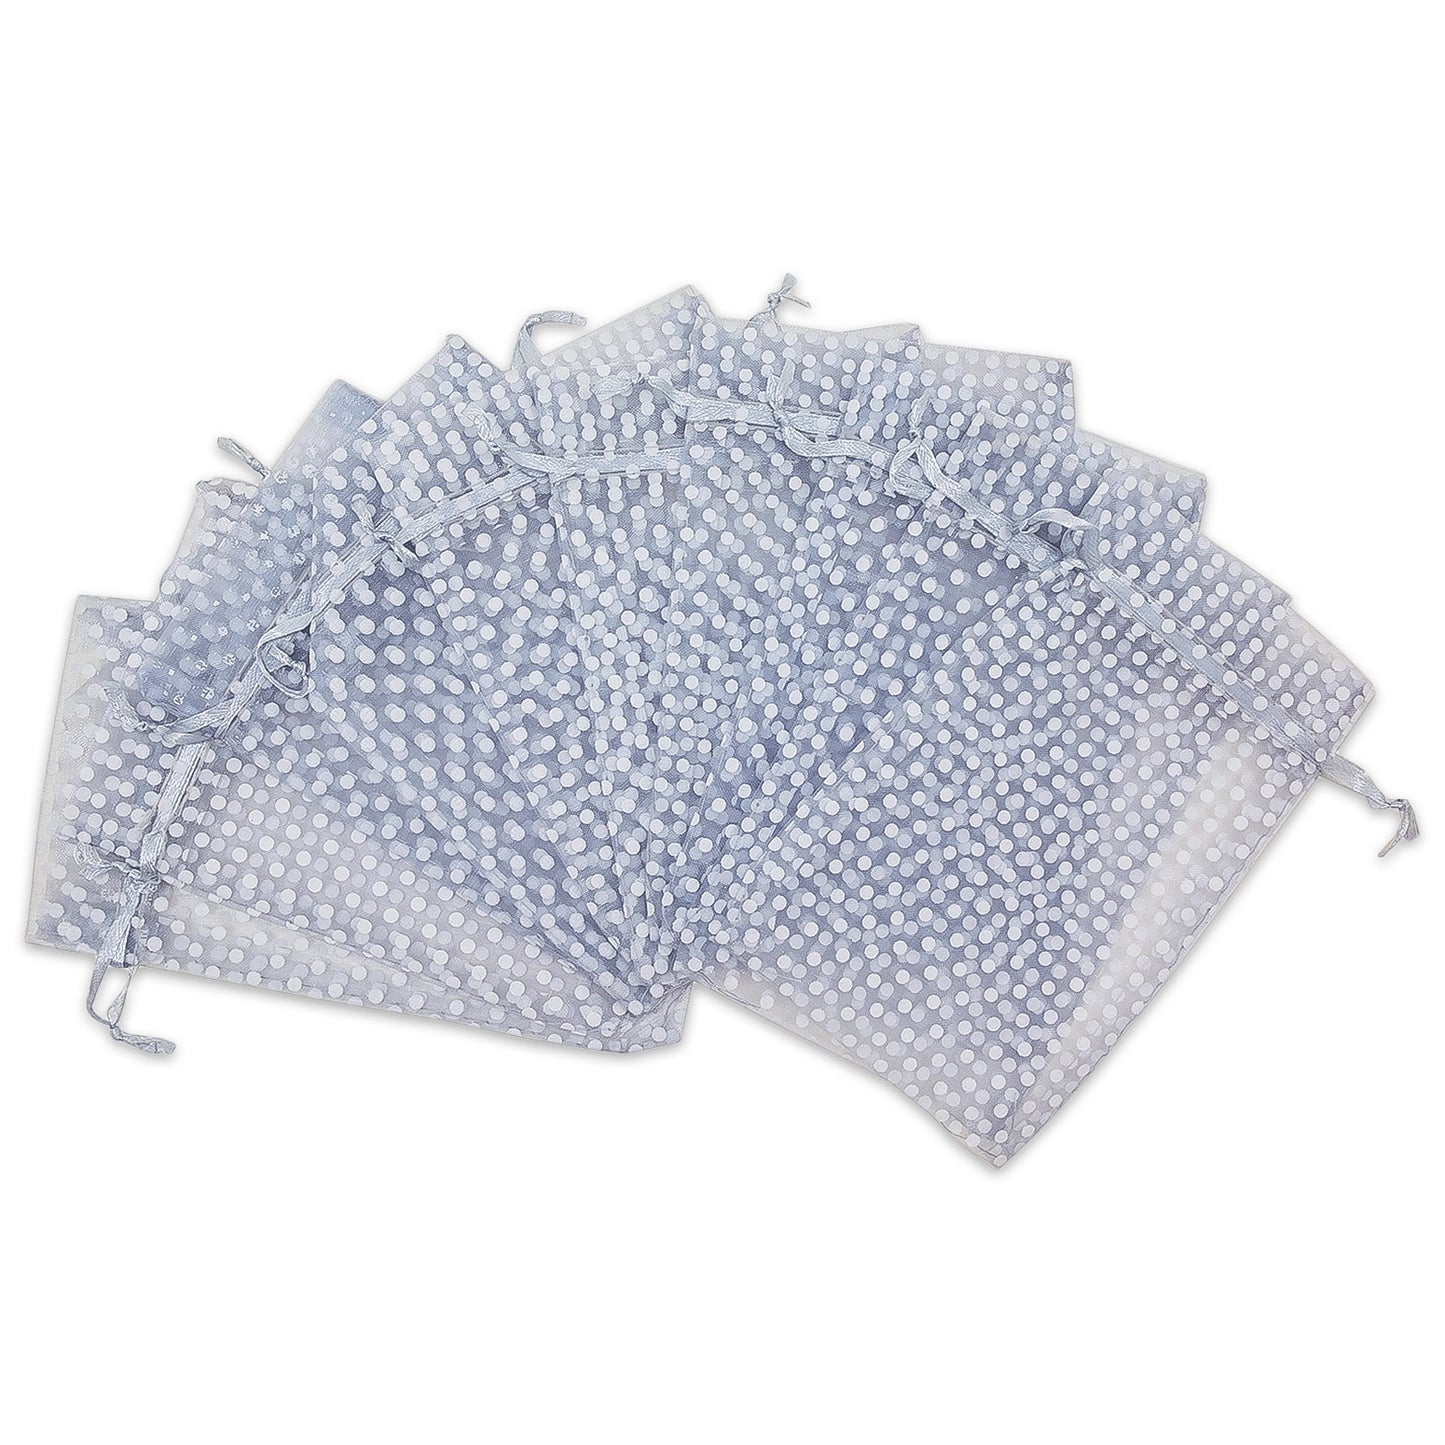 Silver with White Polka Dot Organza Drawstring Pouch Gift Bags